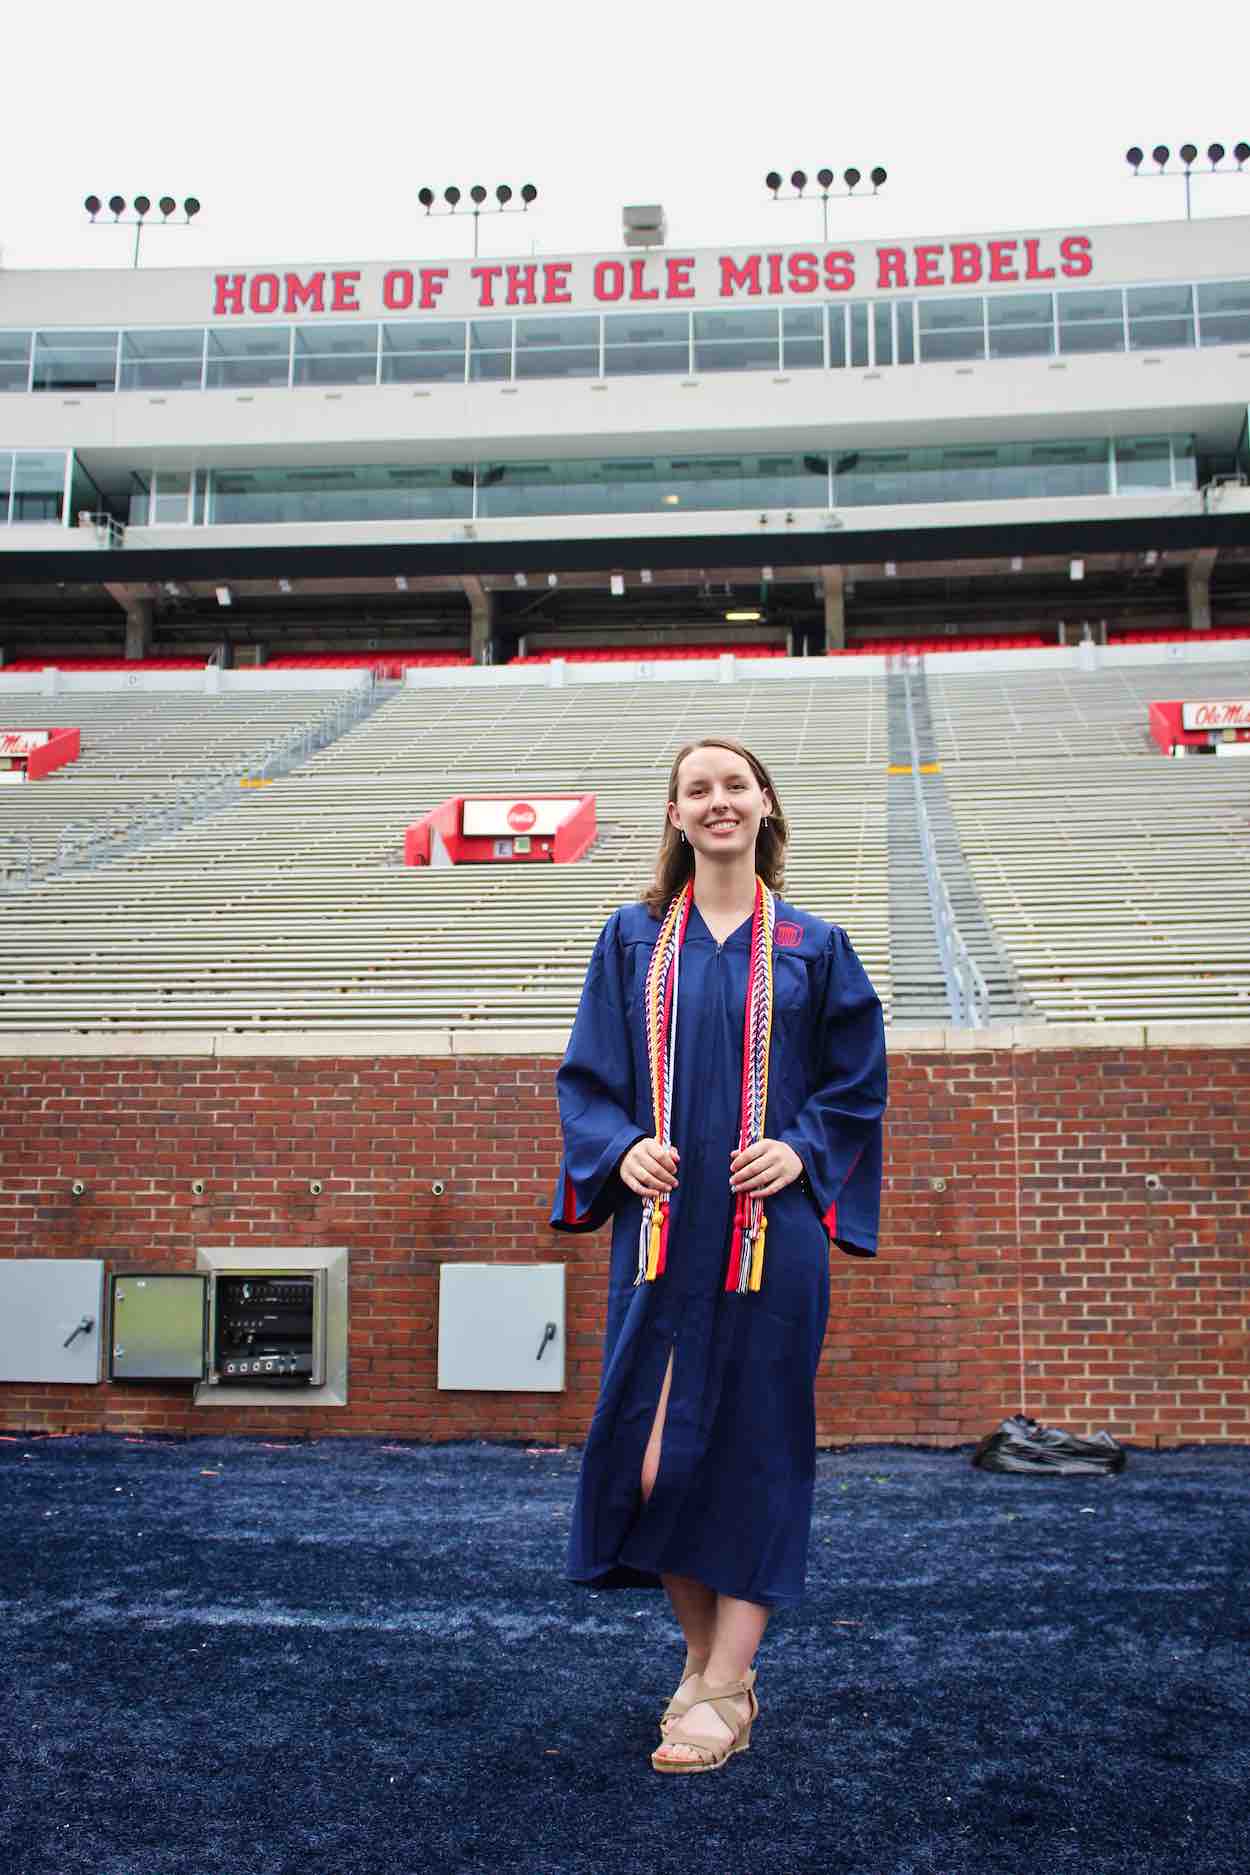 Heidi Myers takes a senior photo on the field at Vaught-Hemingway Stadium. Submitted photo